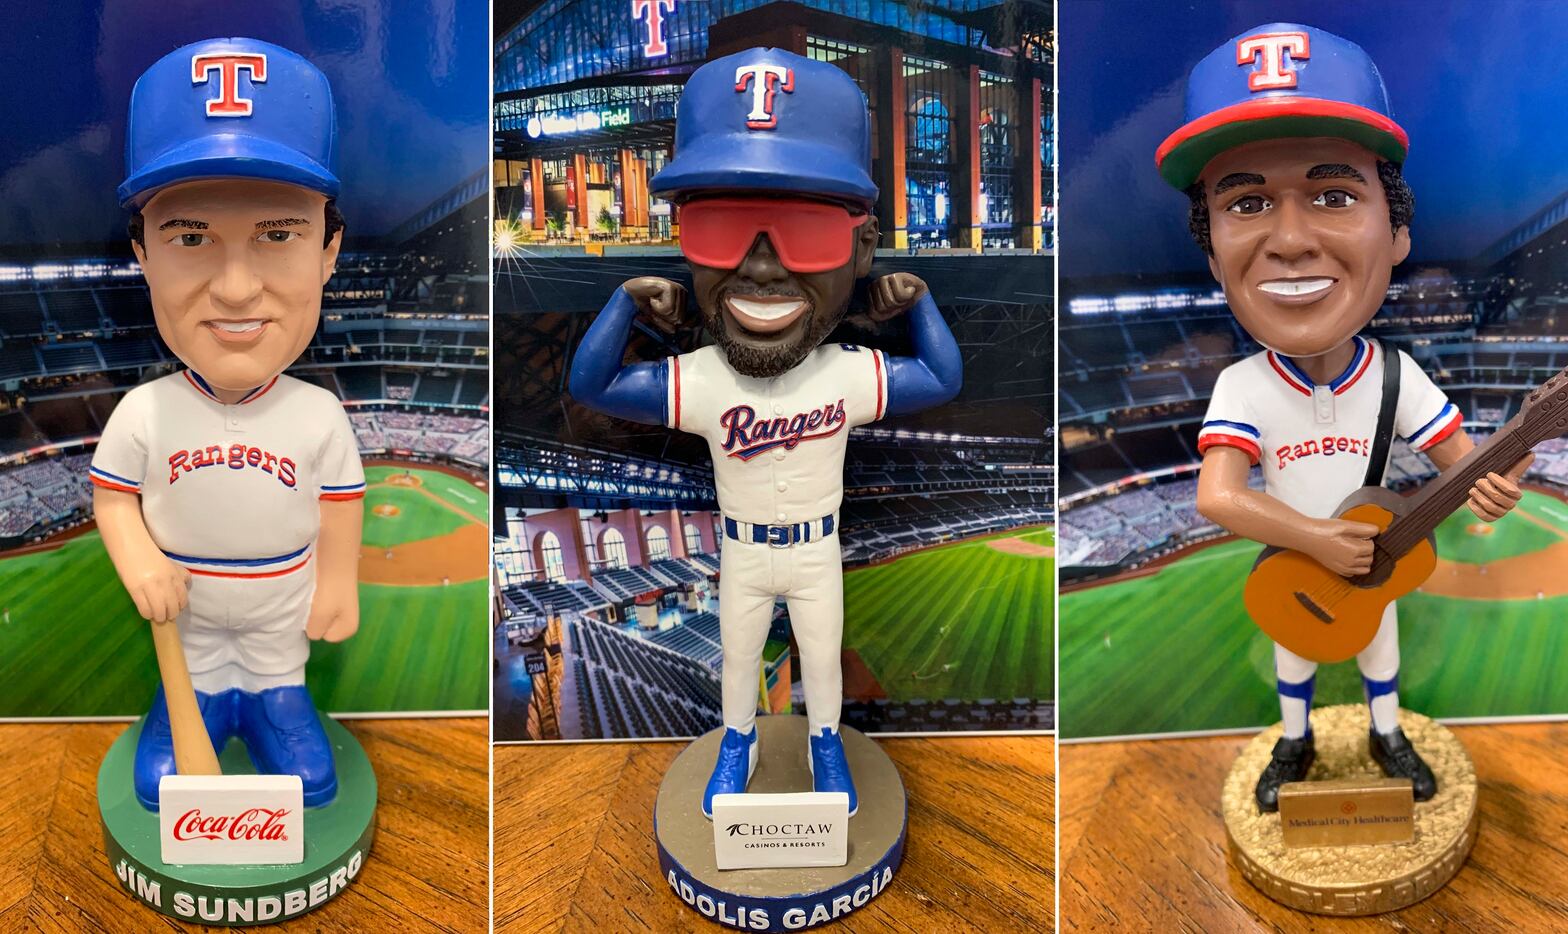 Charley Pride leads 2022 lineup of Texas Rangers promo bobbleheads